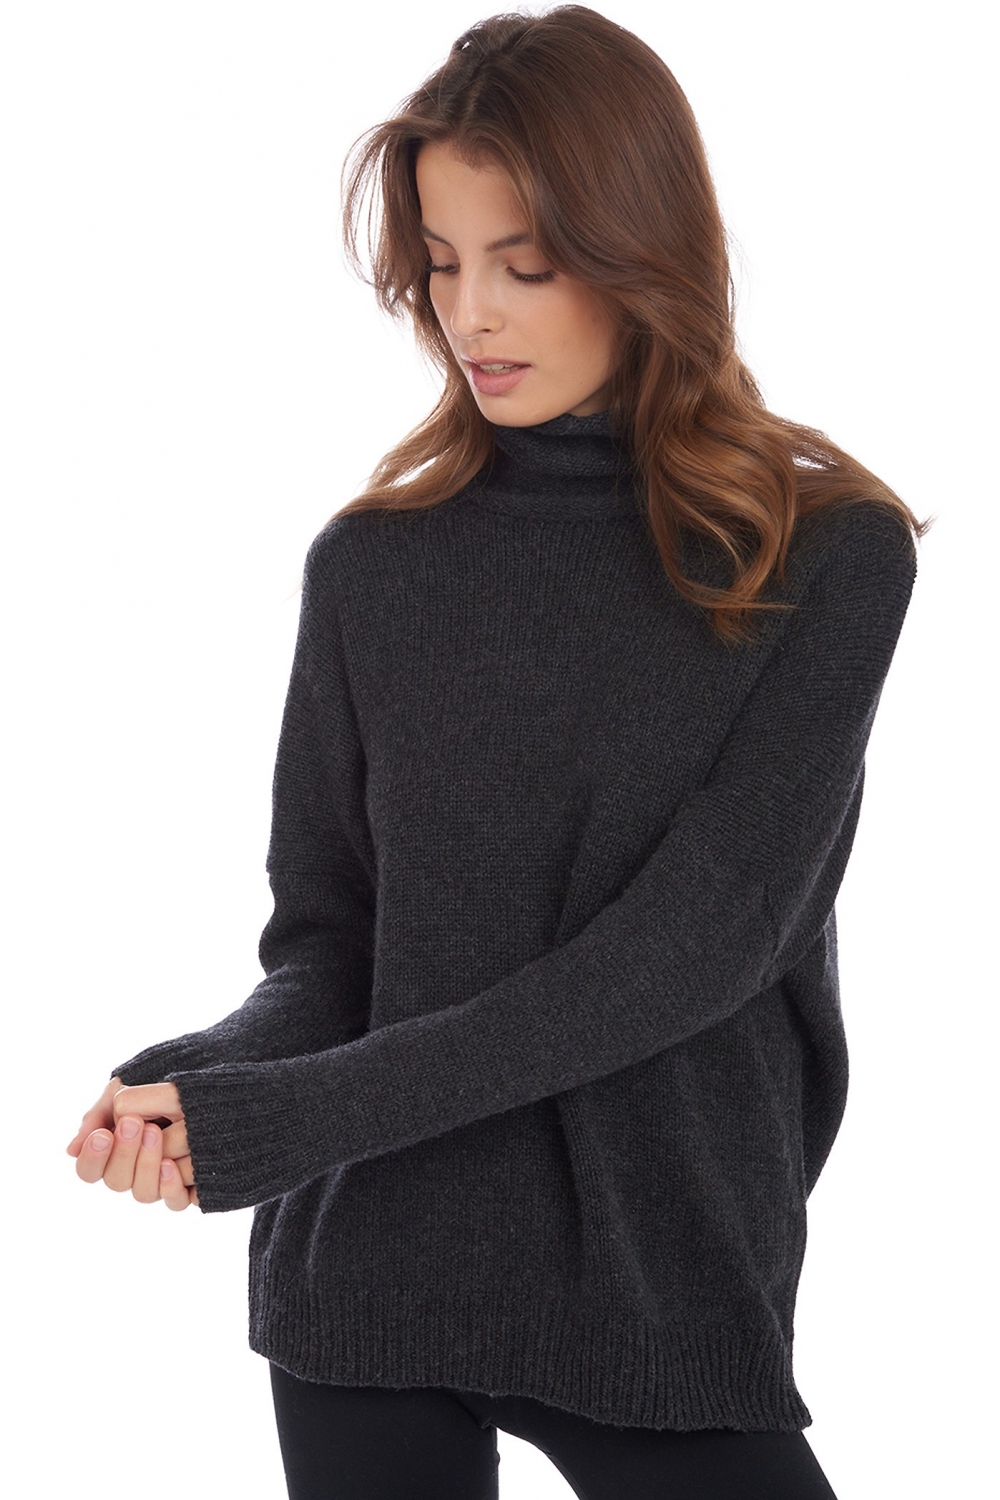 Chameau pull femme agra anthracite m